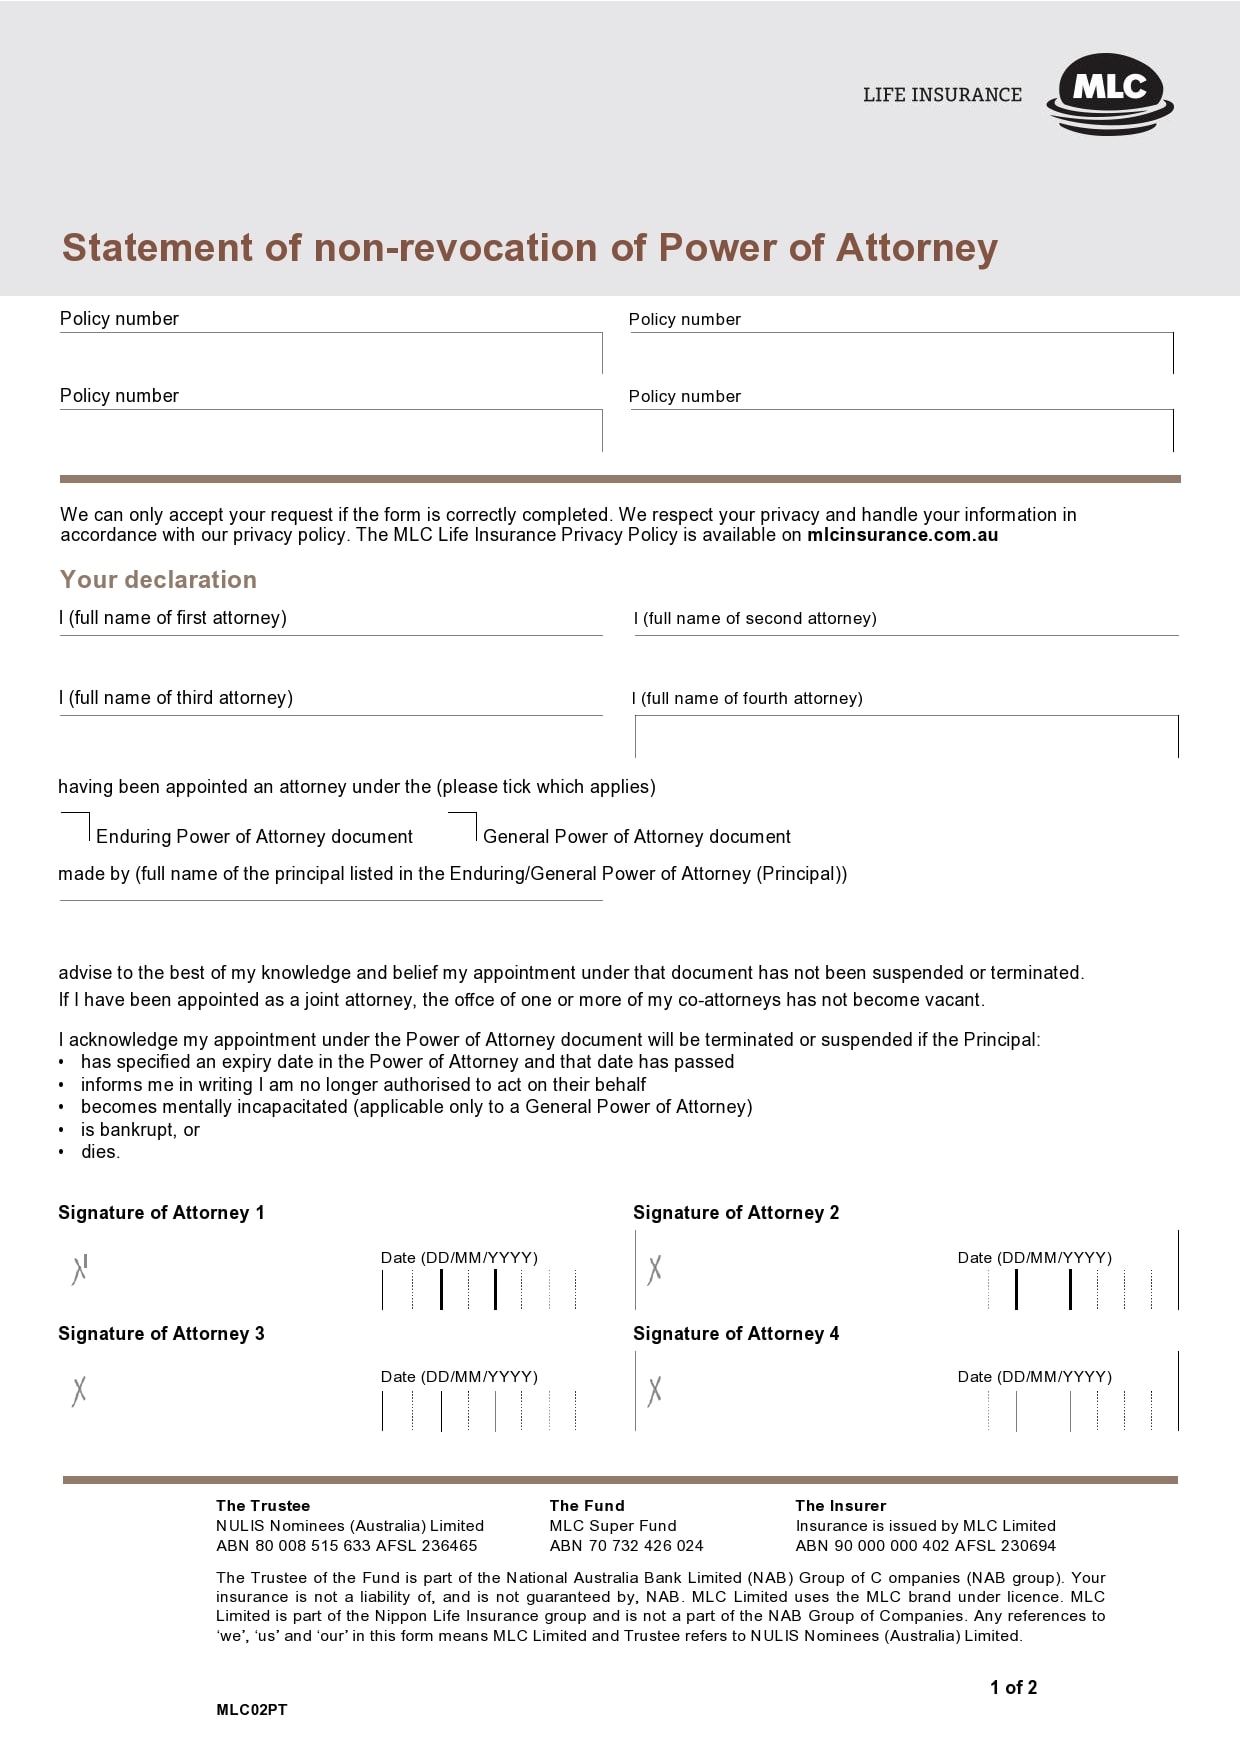 30-free-power-of-attorney-revocation-forms-word-pdf-templatearchive